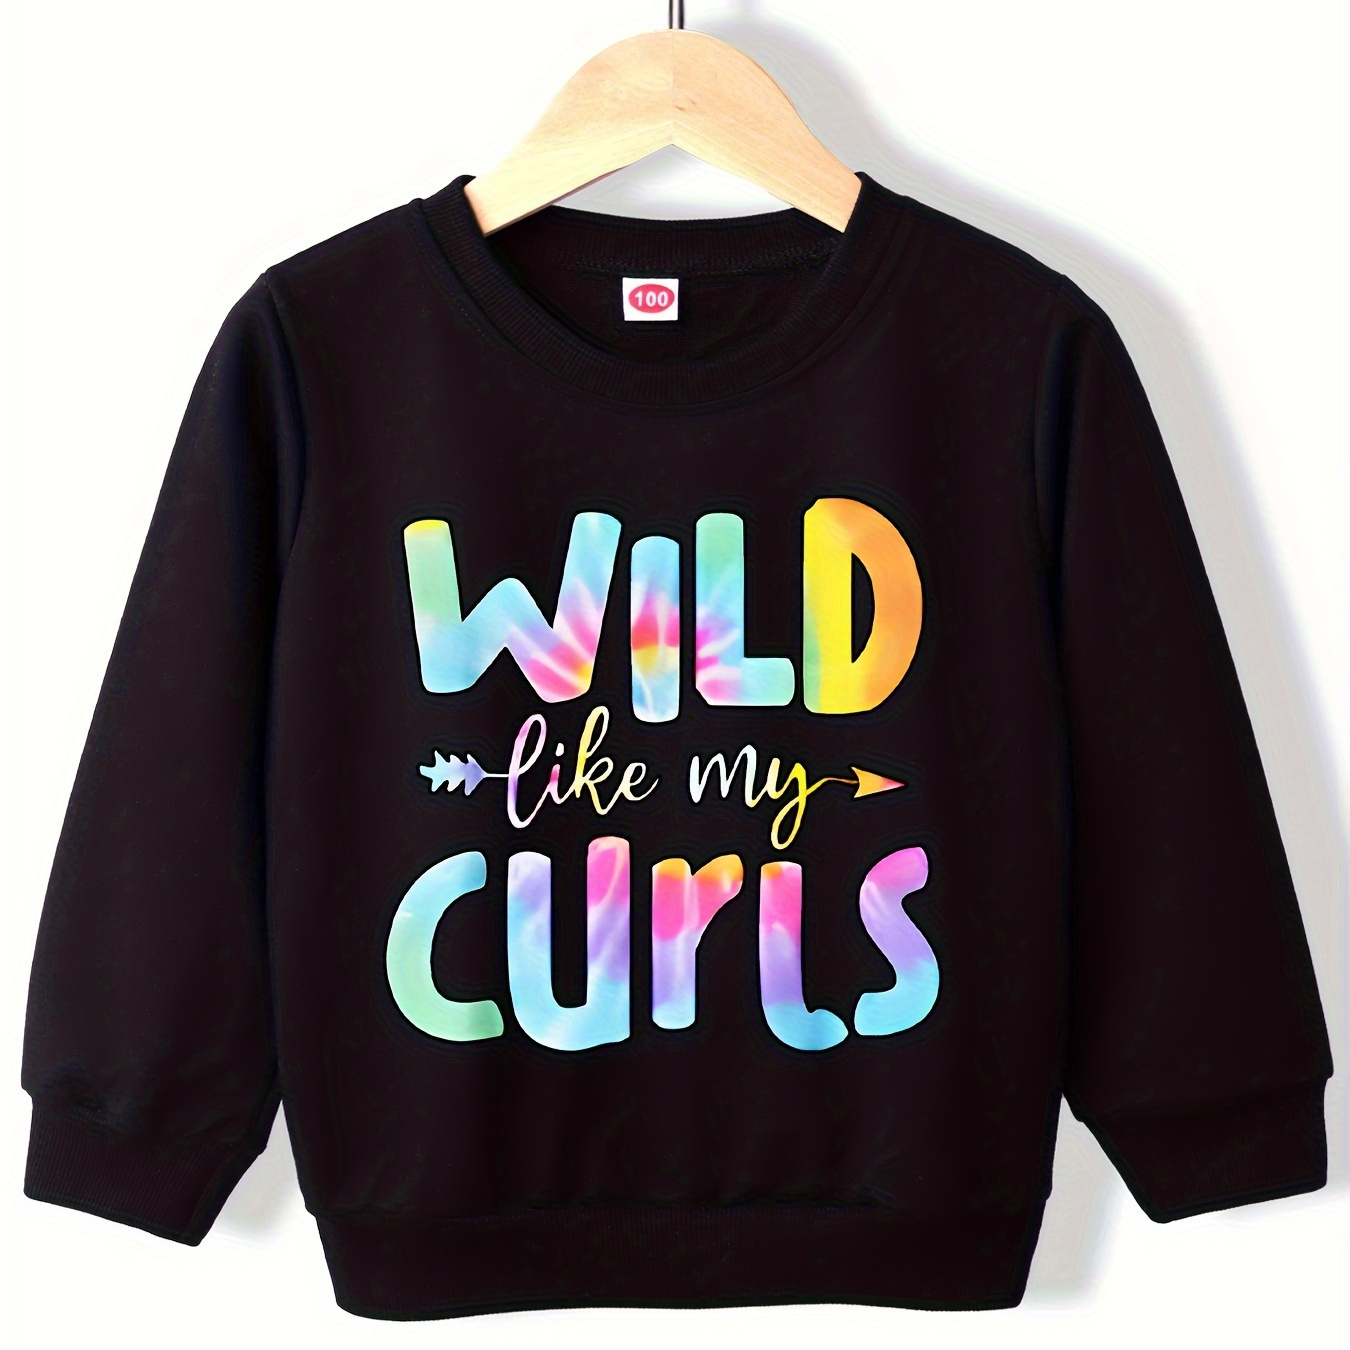 

''wild Like Curls'' Colorful Print, Girls Crew Neck Sweatshirt Comfy Tops For Winter Fall, Holiday Gifts/ Kids Clothes